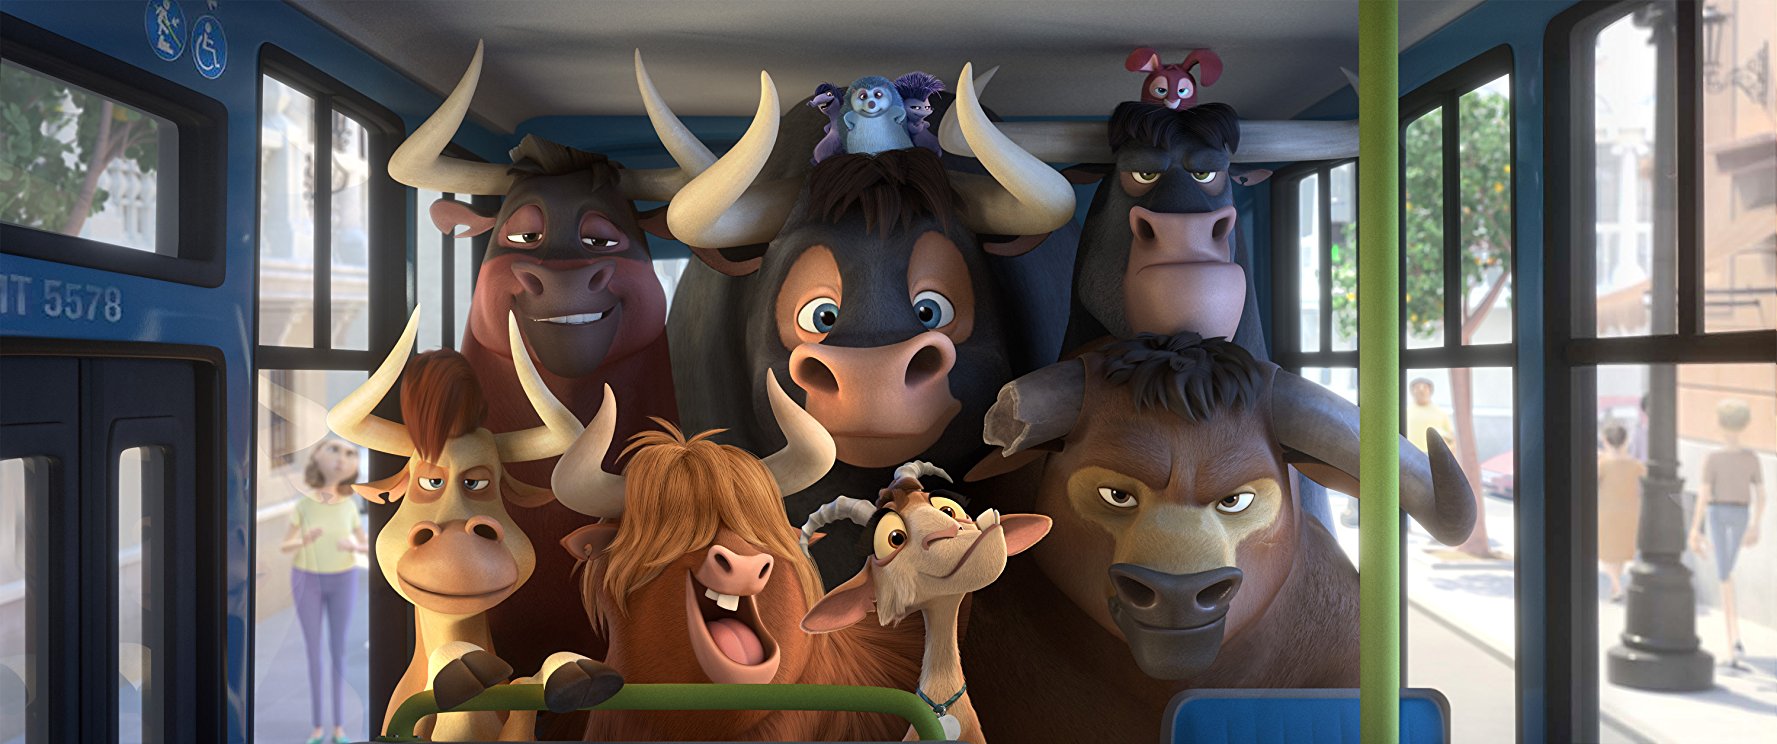 ‘Ferdinand’ is entertaining but doesn’t live up to its source material